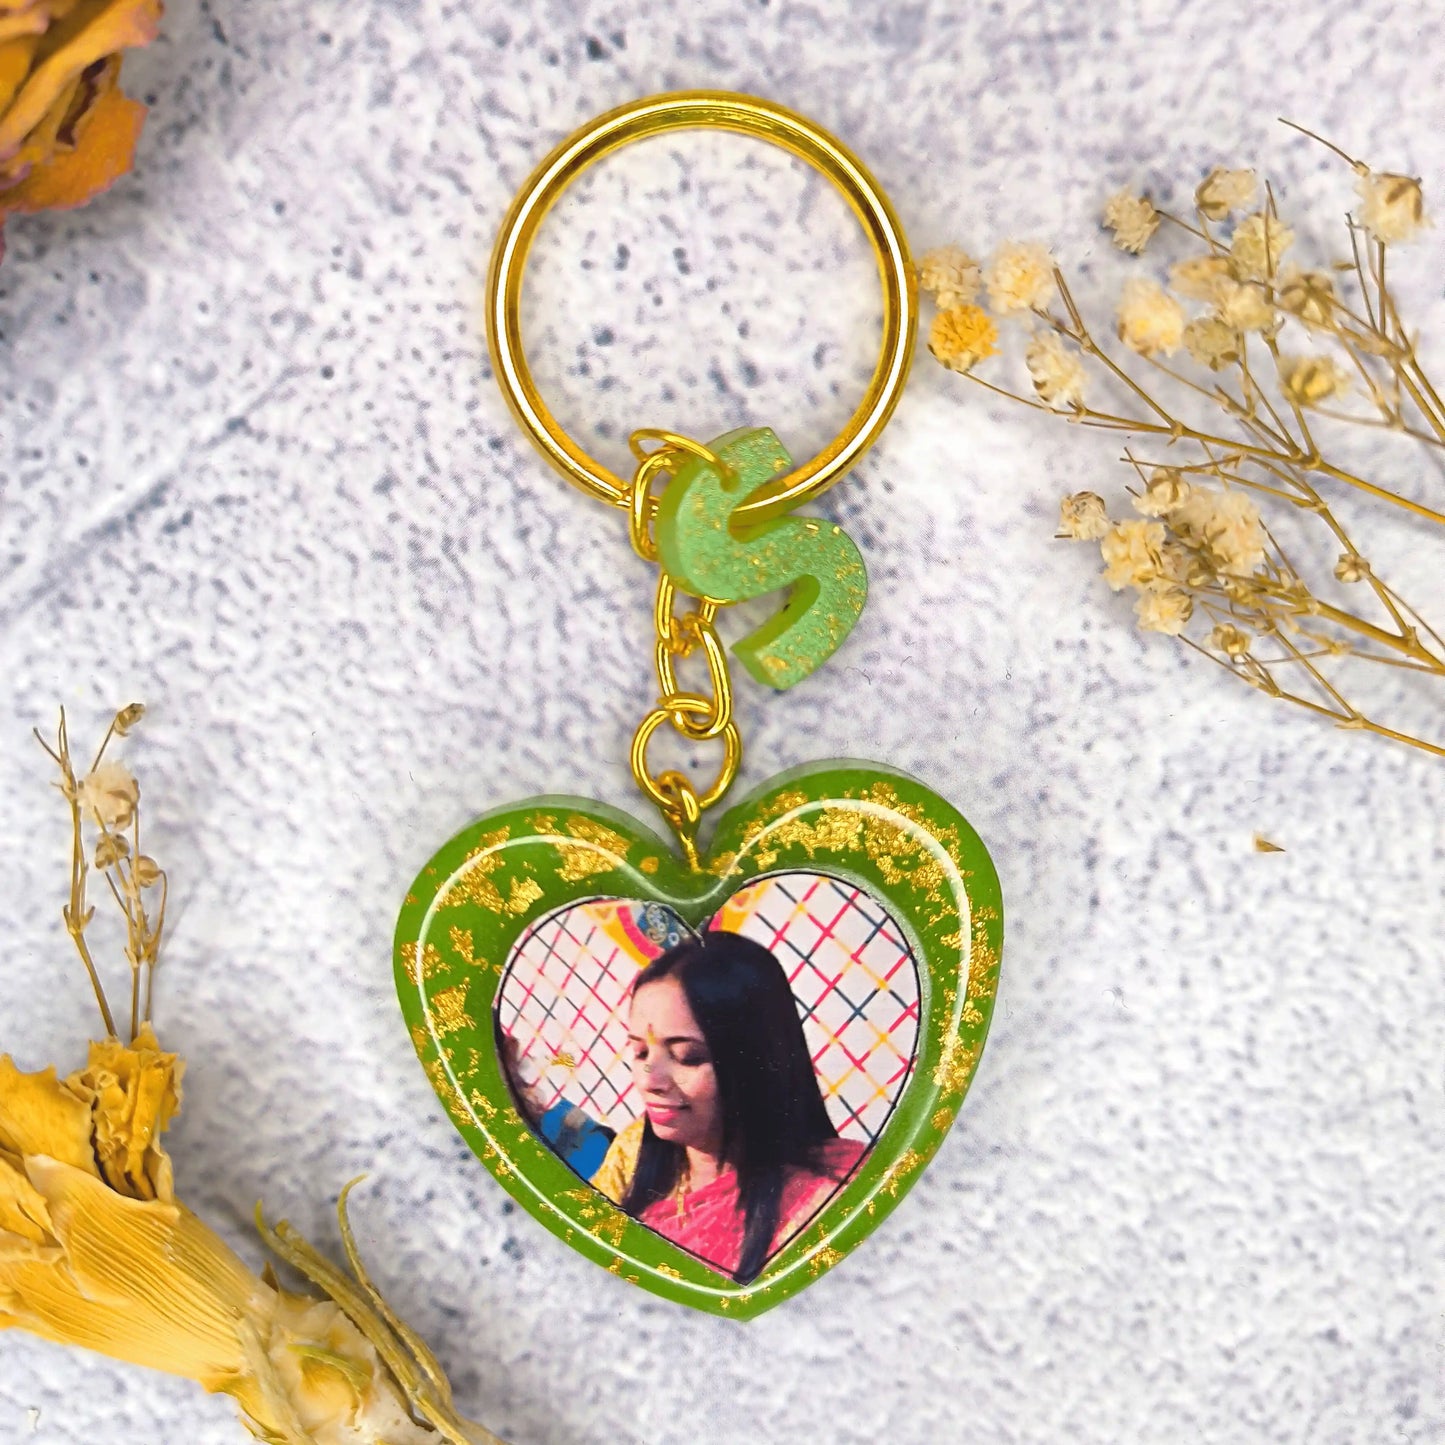 Purchase Handmade Heart-shaped green Resin keychains With photo Perfect for Wife